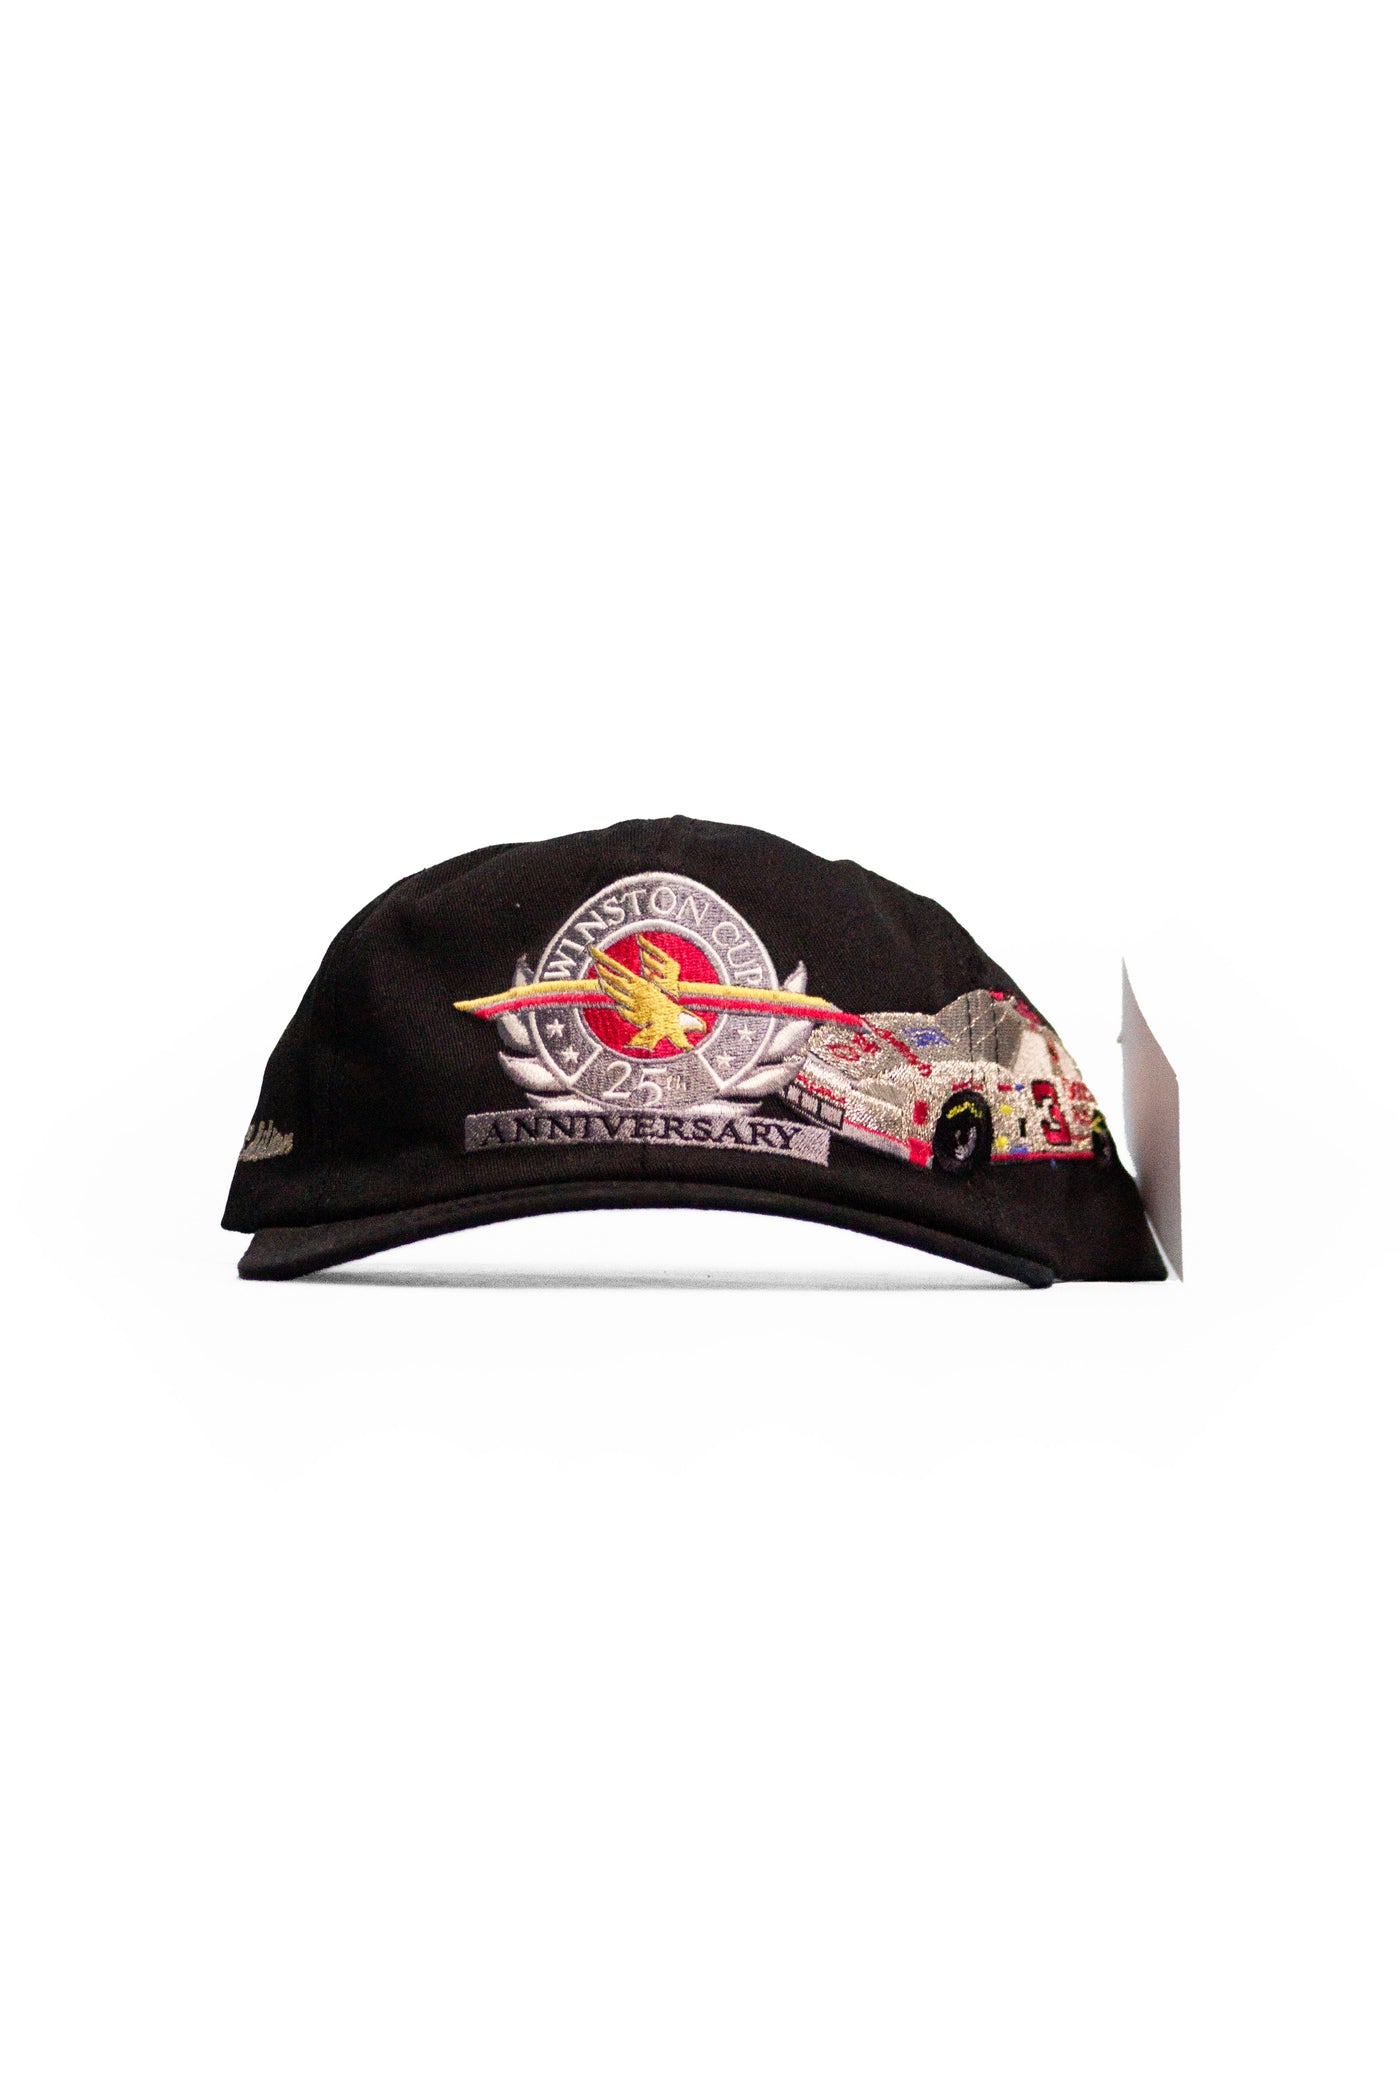 Vintage Dale Earnhardt Winston Cup 25th Anniversary Snapback